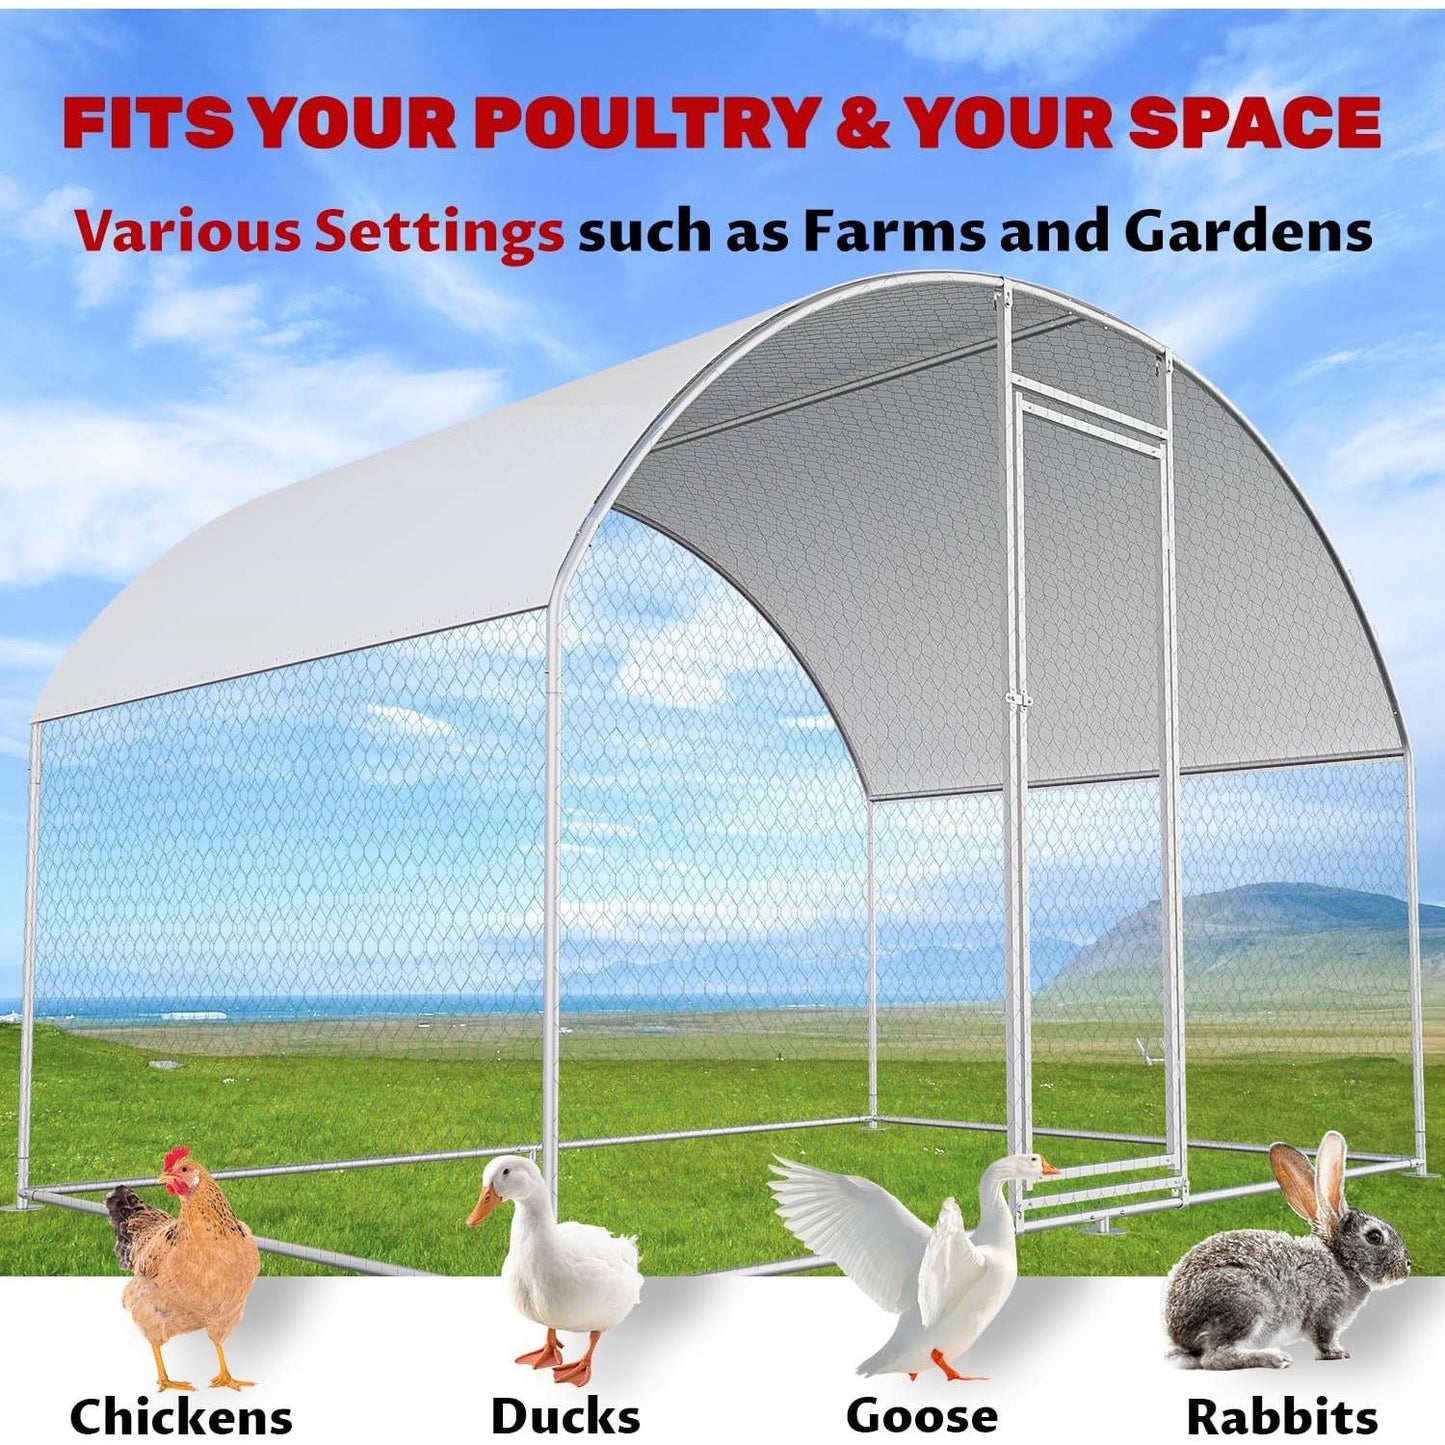 9.8 Ft x 6.6 Ft Outdoor Metal Chicken Coop with Dome Roof and Waterproof Cover